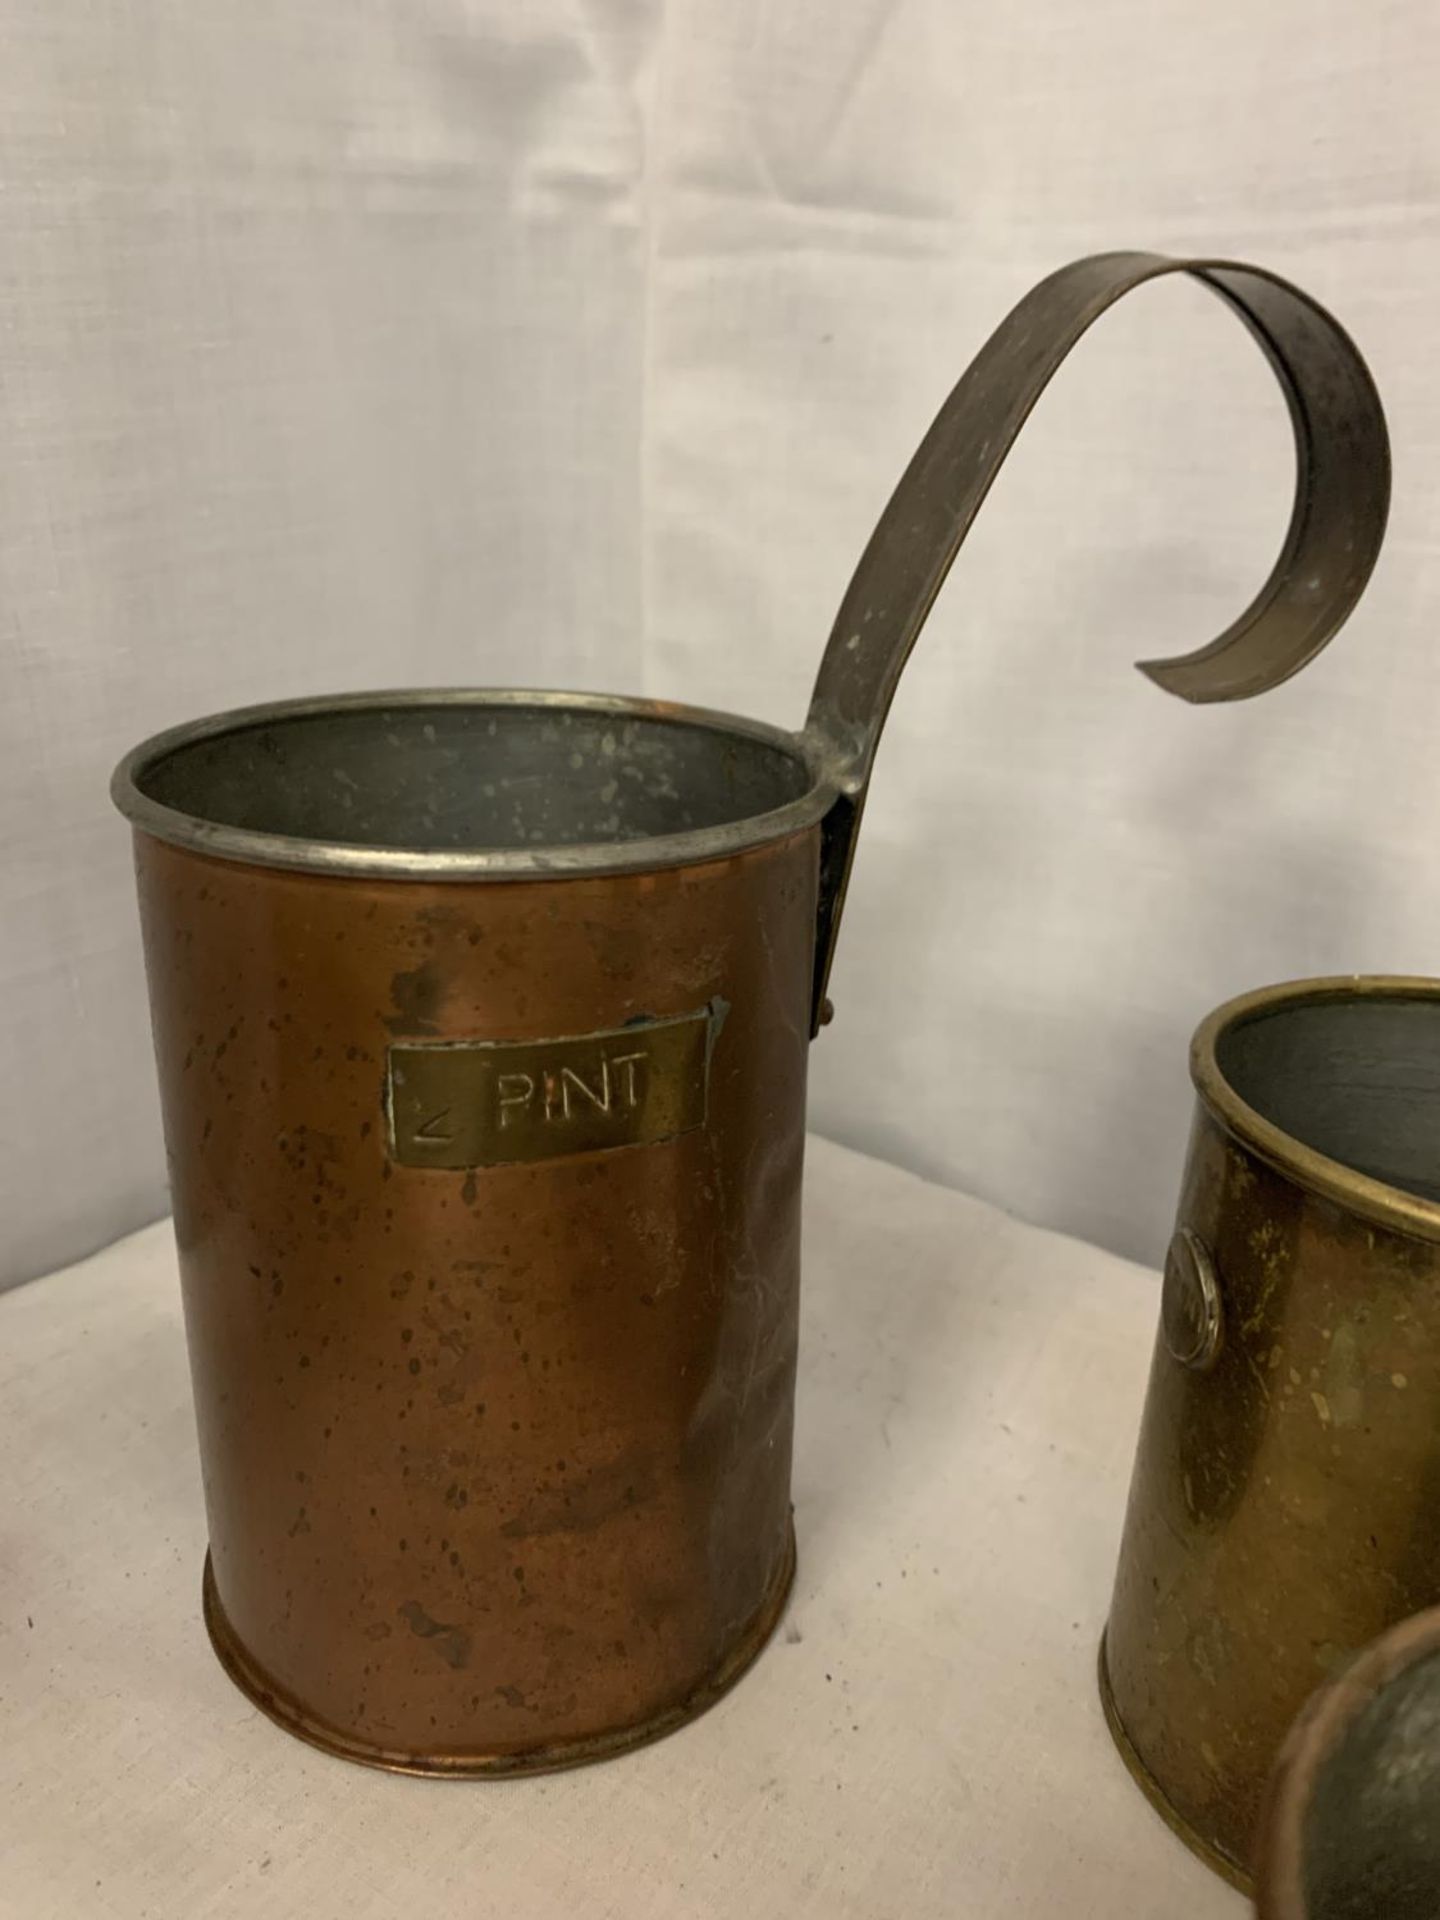 FIVE COPPER AND BRASS GROG/PORTER PINT AND TWO PINT SCOOPS - Image 2 of 3